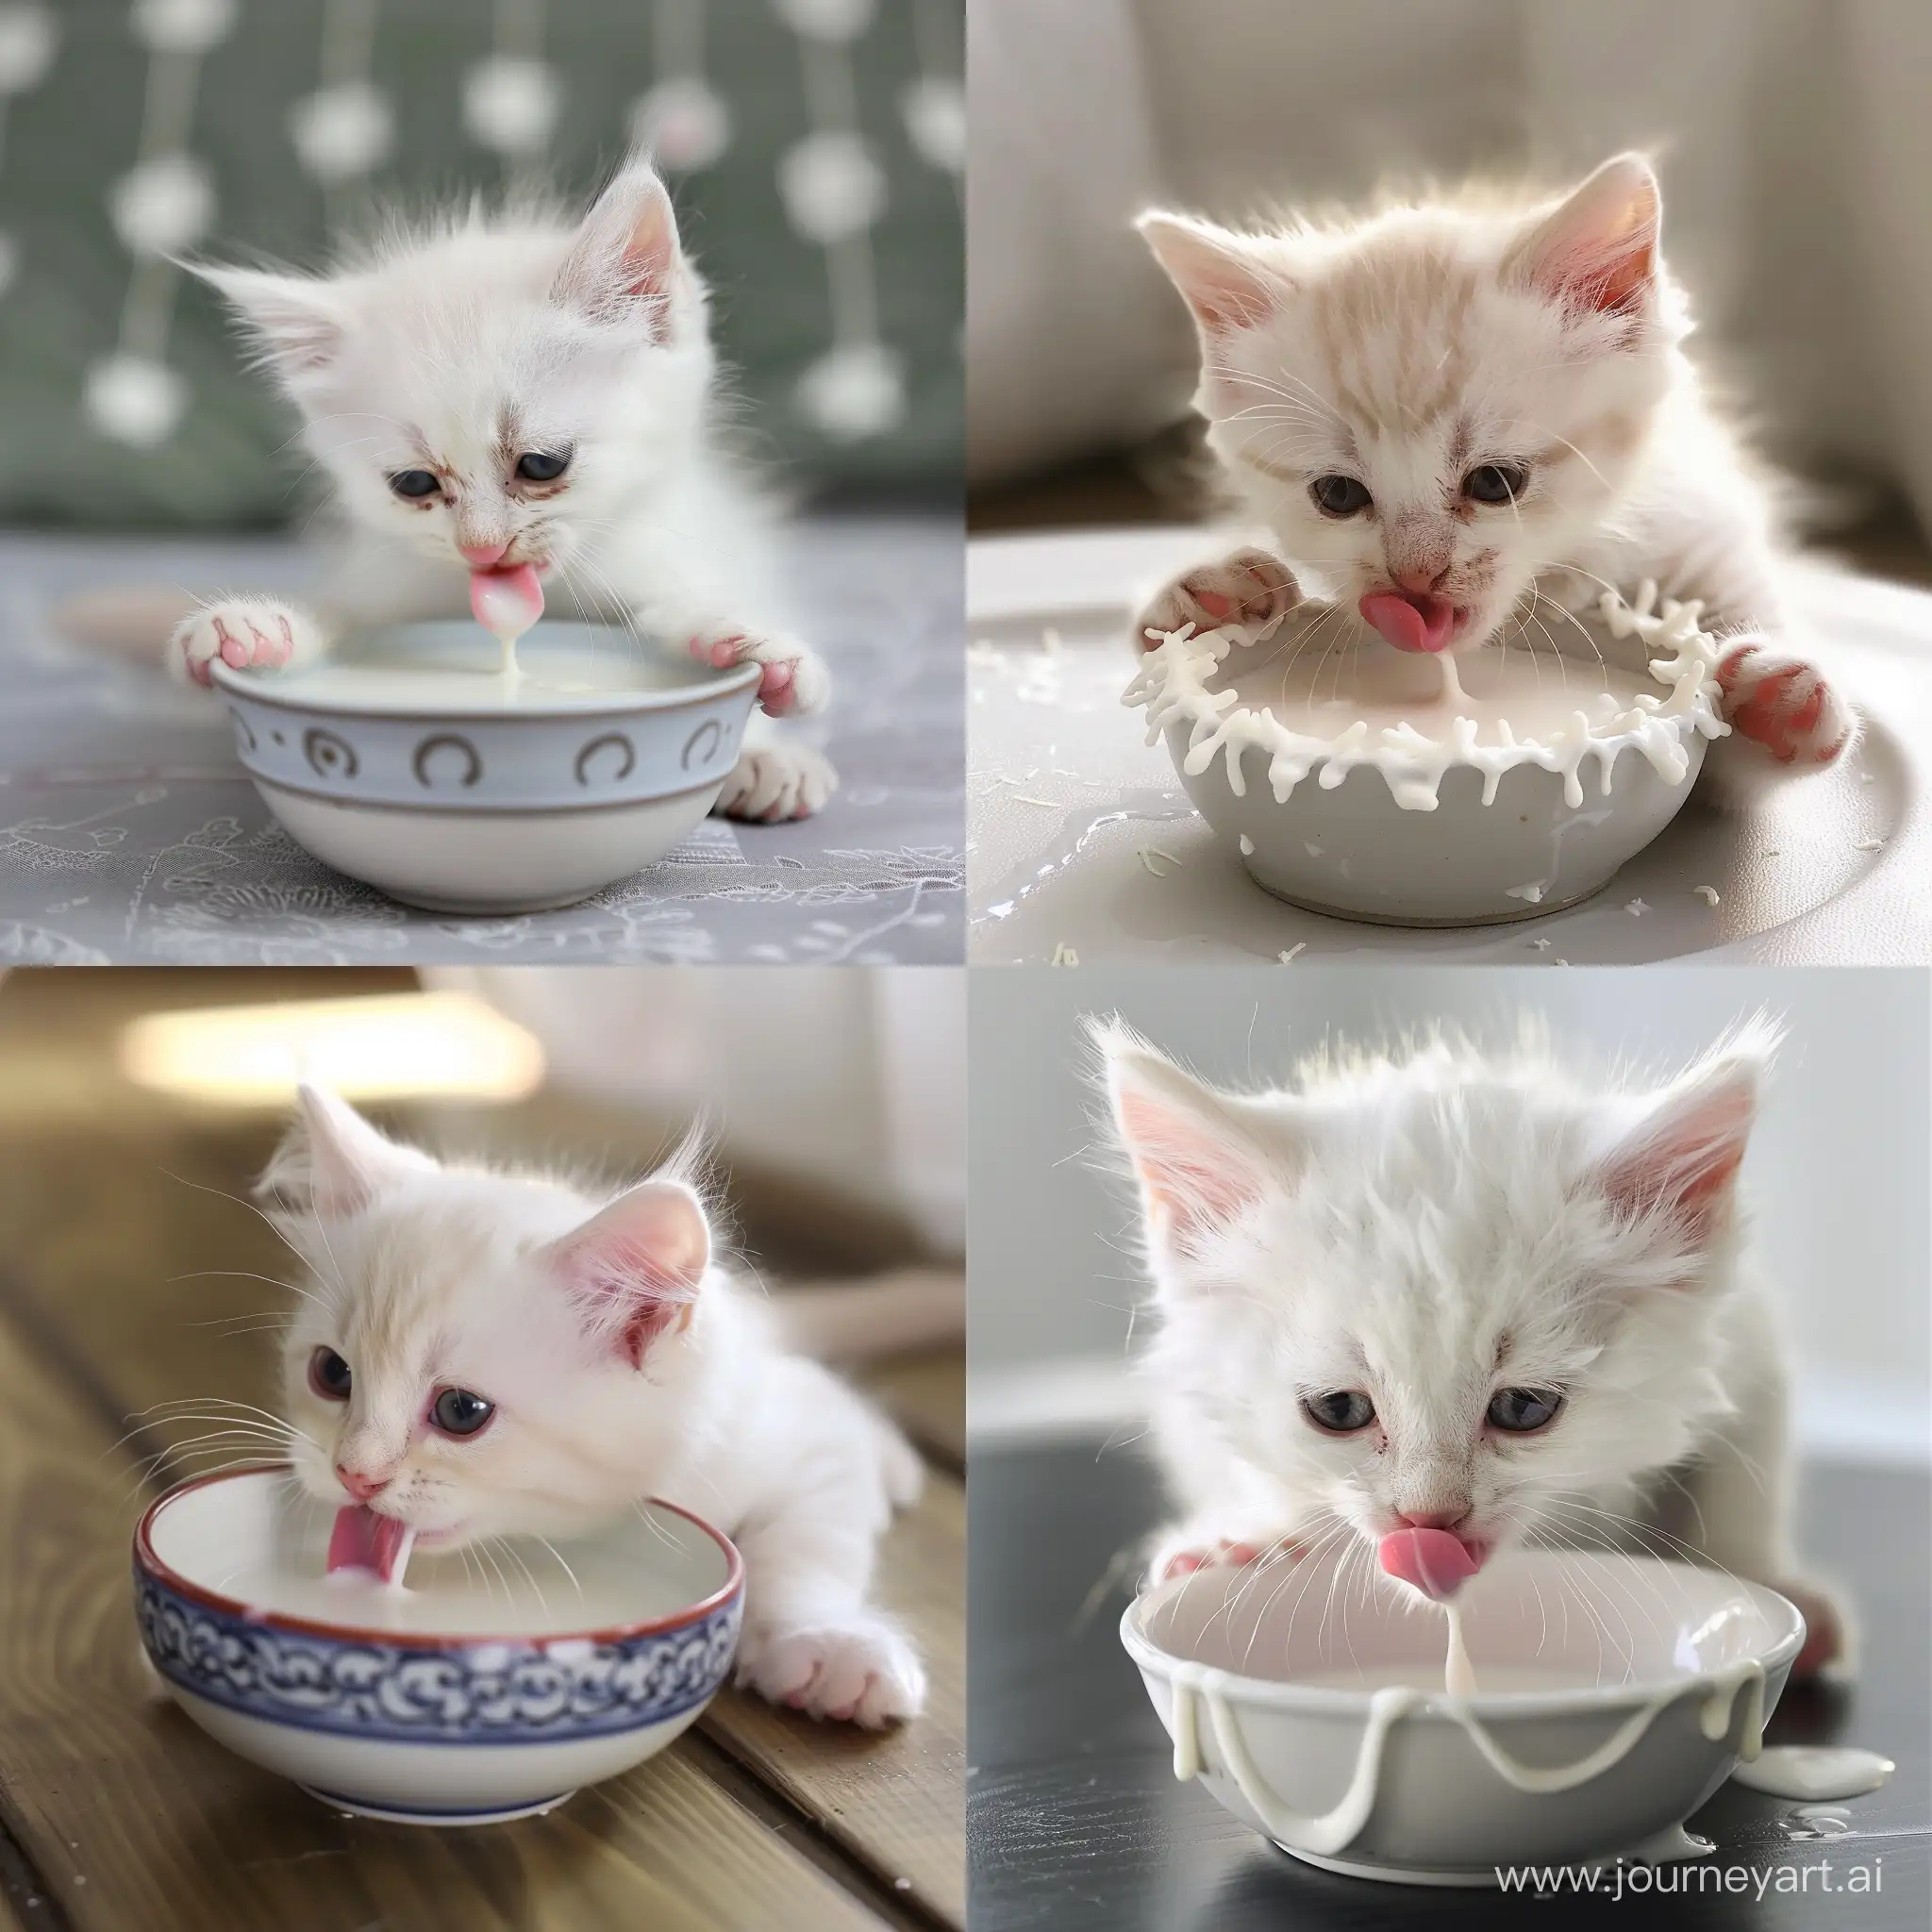 Adorable-90DayOld-White-Kitten-Licking-Milk-from-Bowl